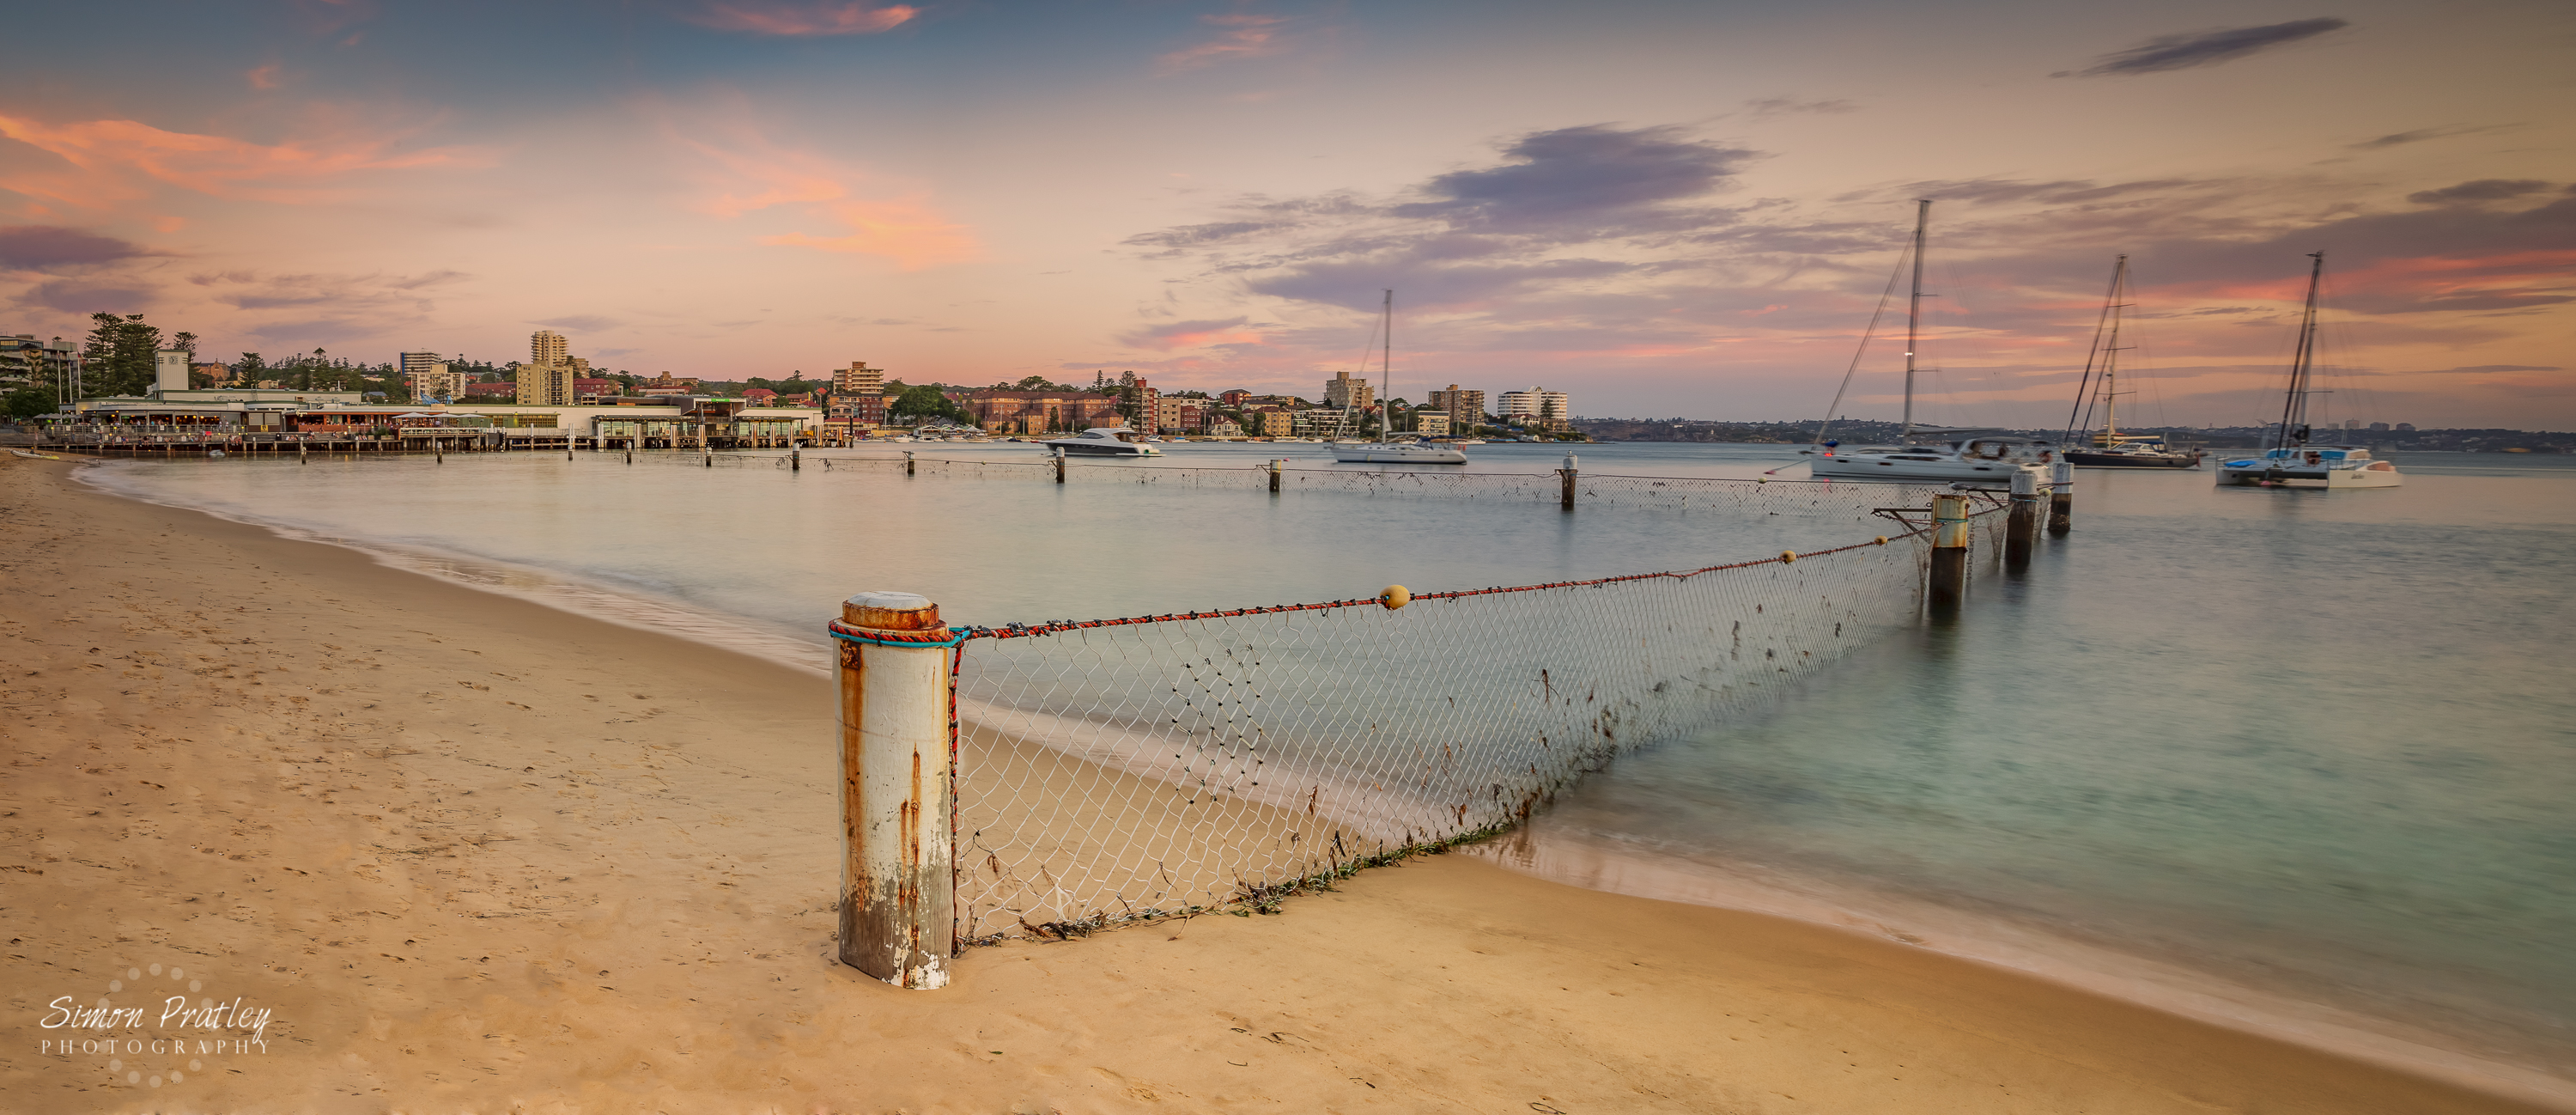 Sunset at Manly Cove